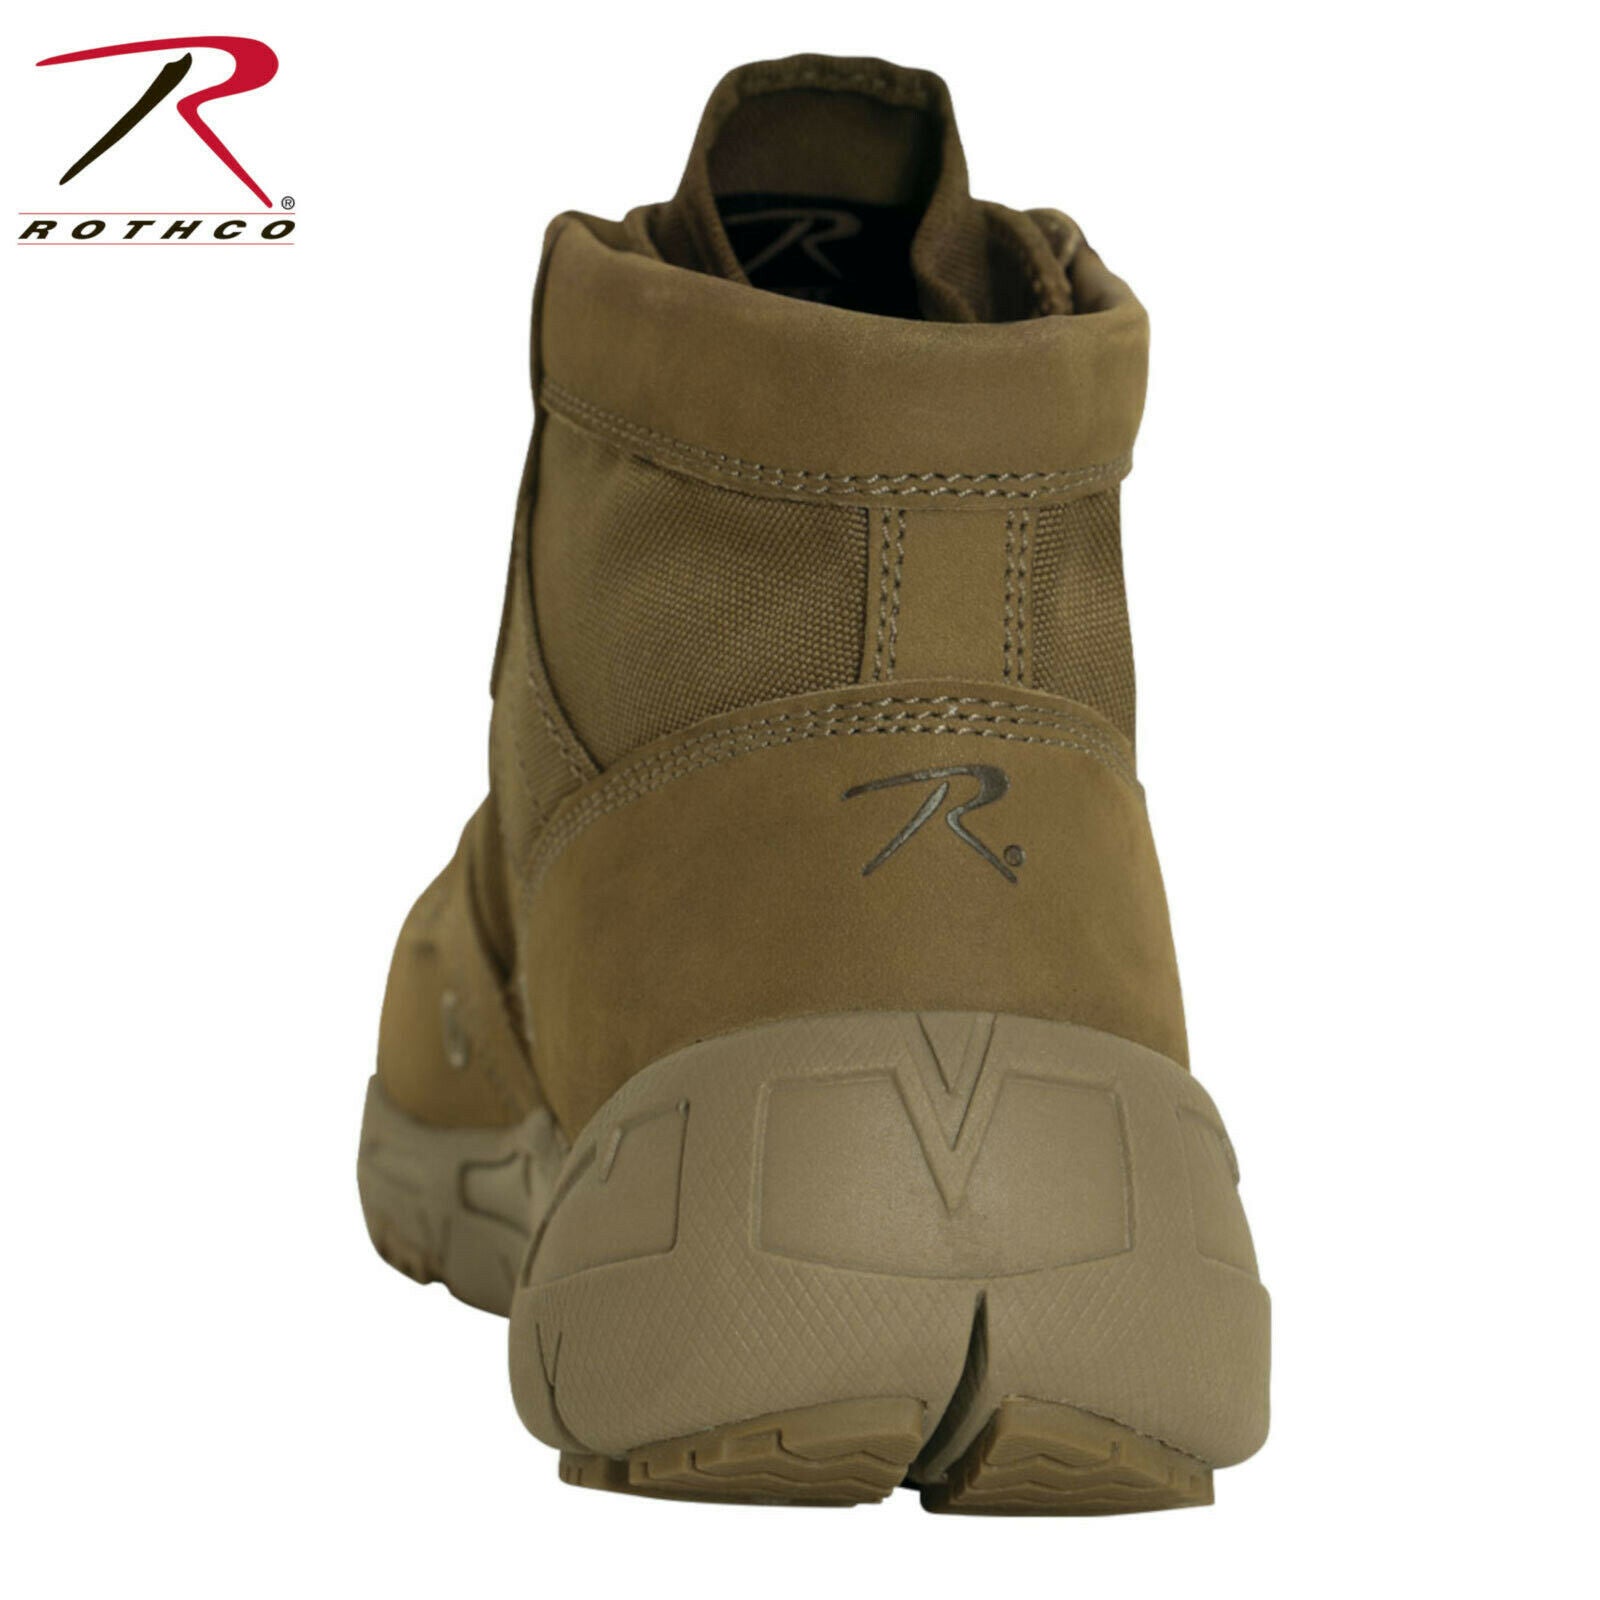 rothco coyote boots